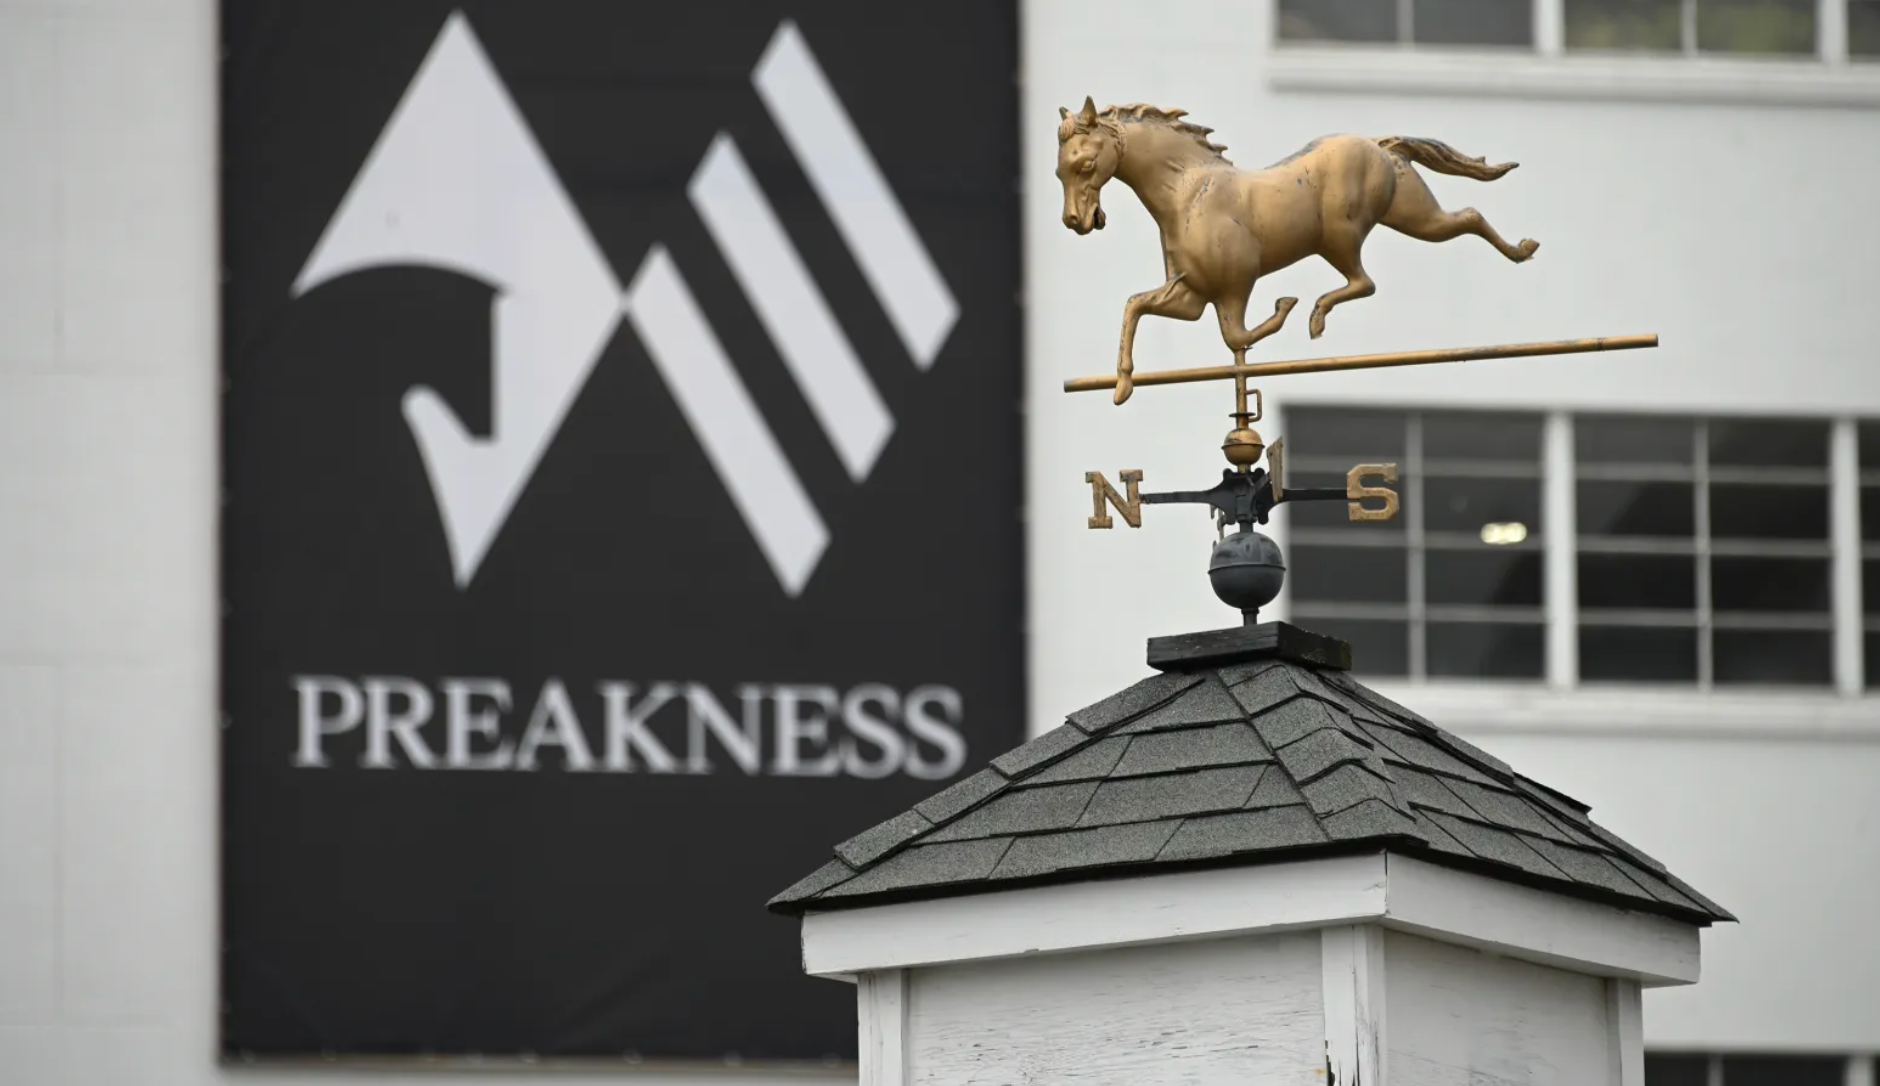 Royal Poppy Teams with Dettori For Skipat Stakes On Preakness Day!